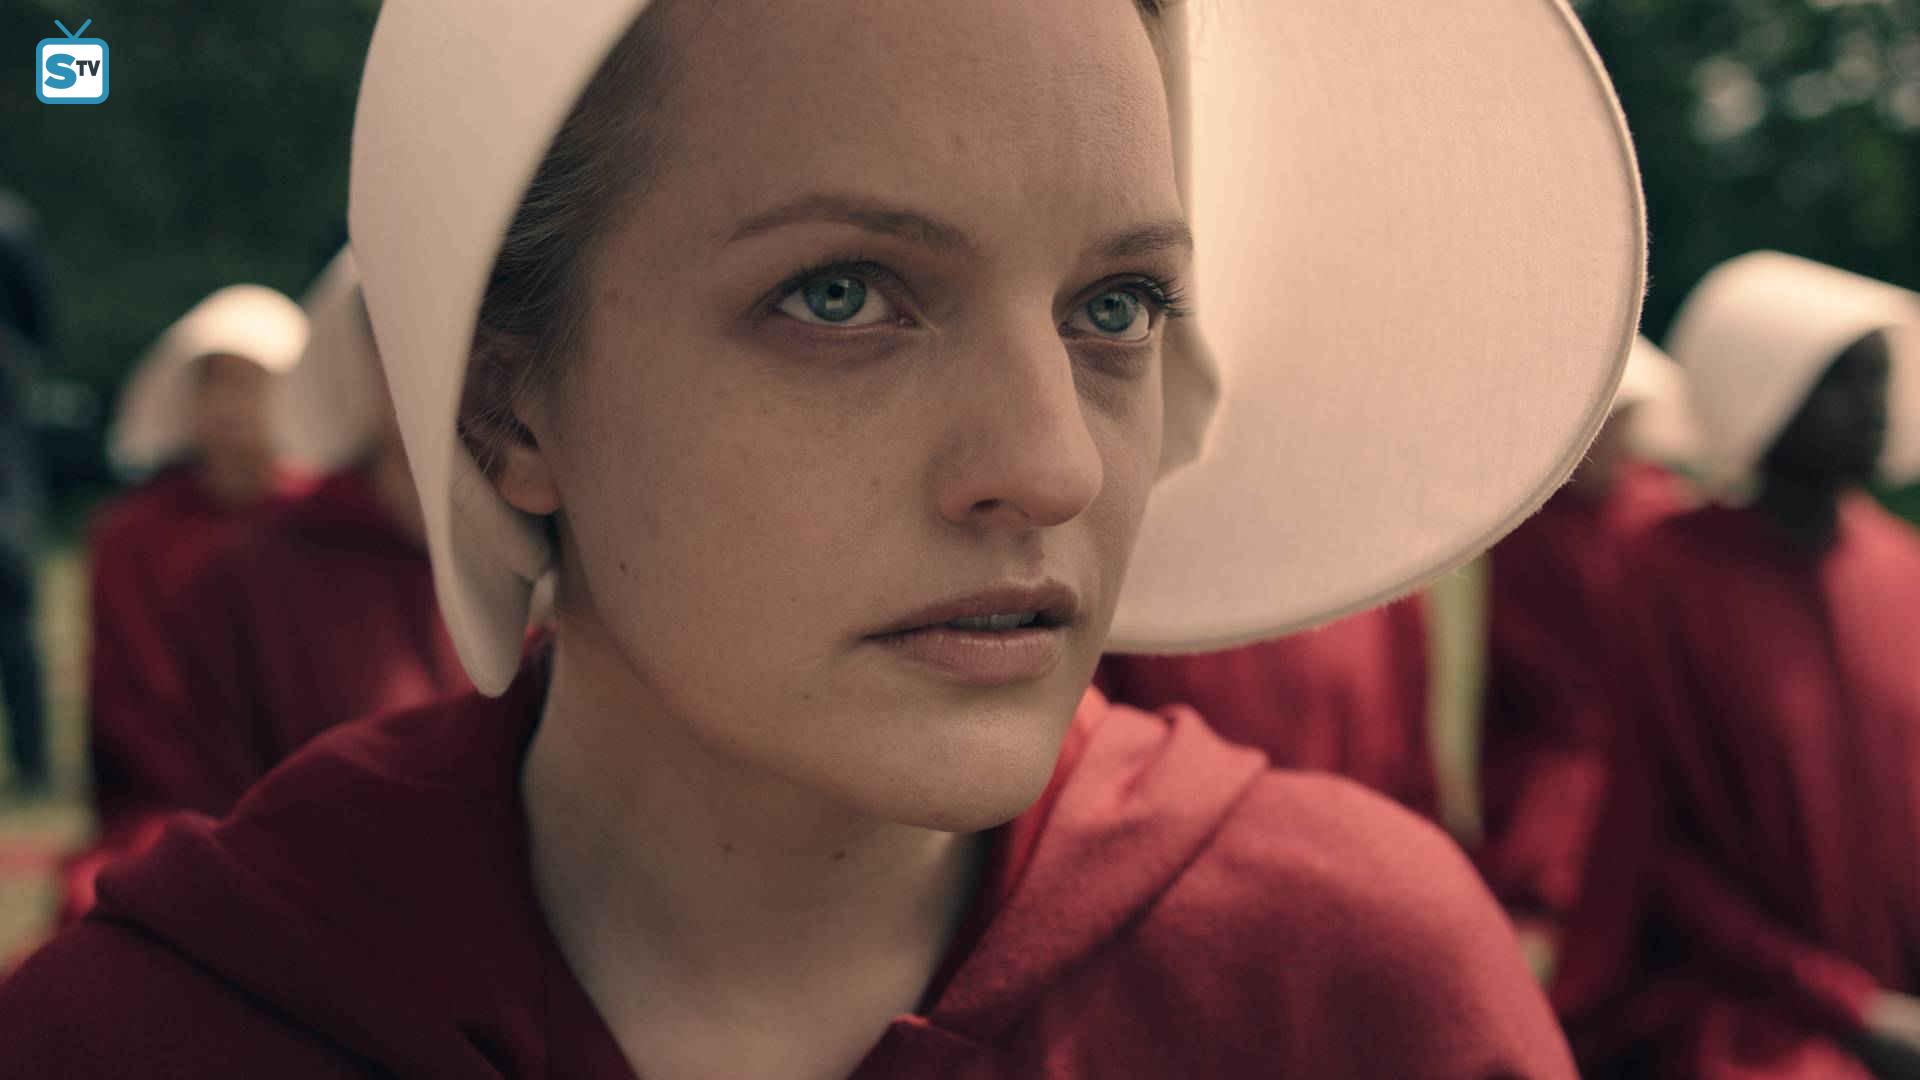 The Handmaid's Tale: Offred | Season 1 | Episode 1